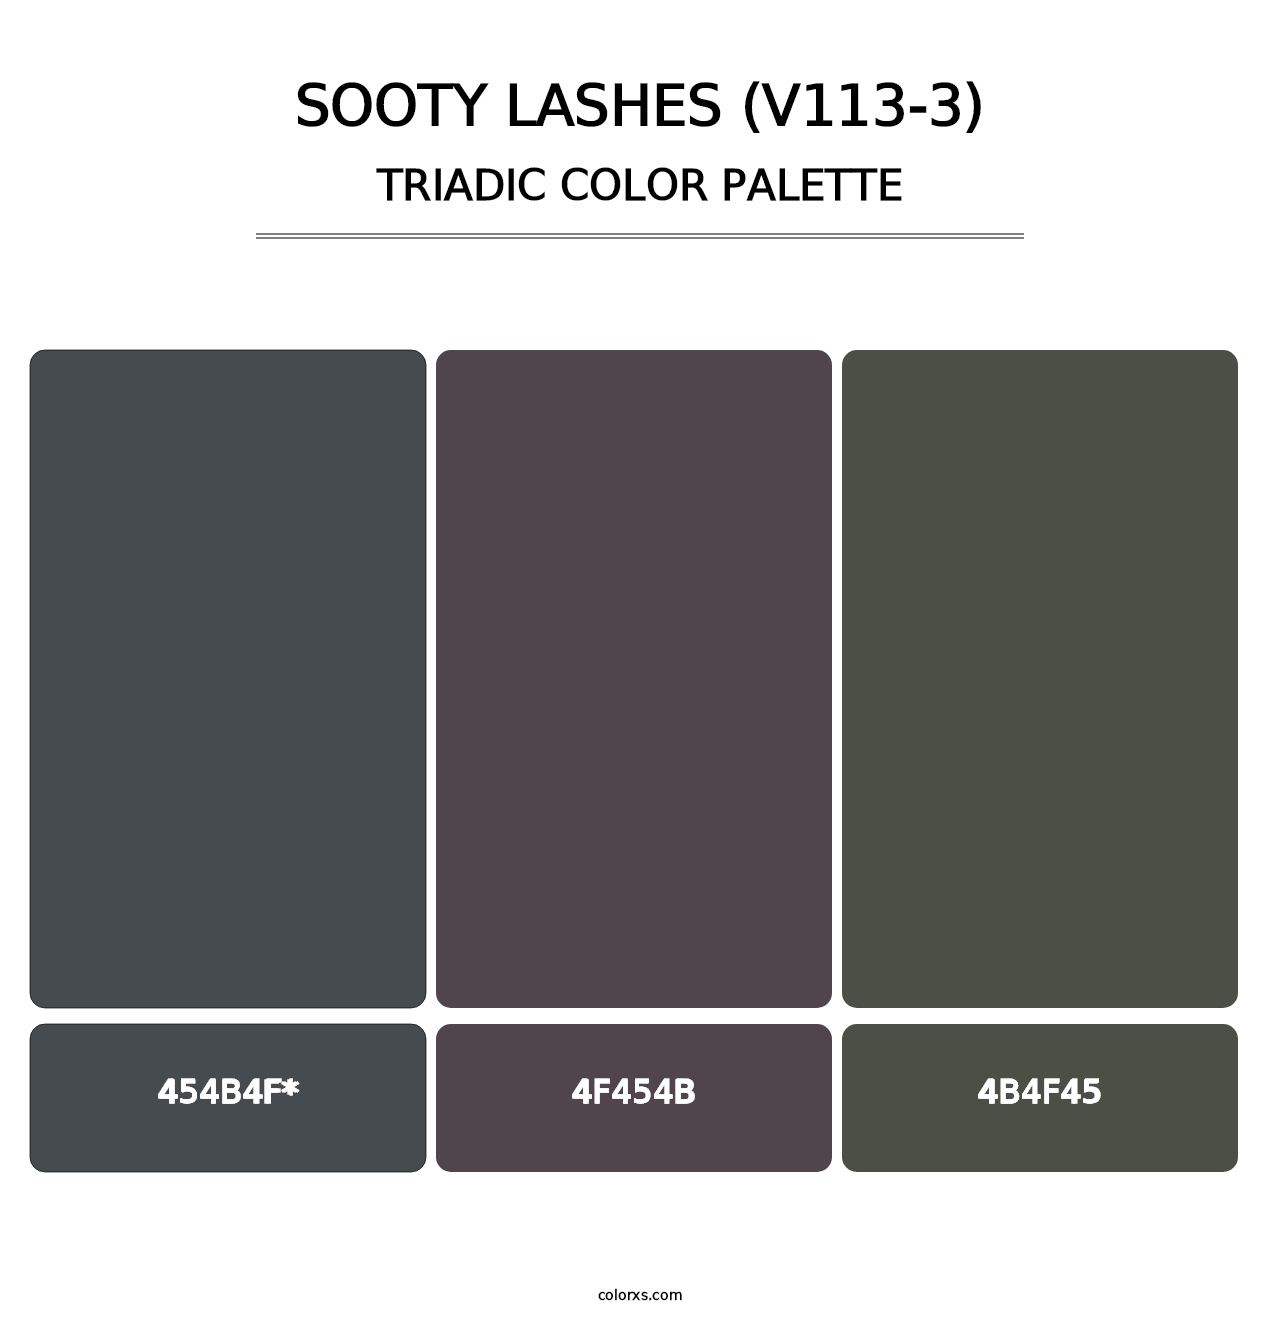 Sooty Lashes (V113-3) - Triadic Color Palette